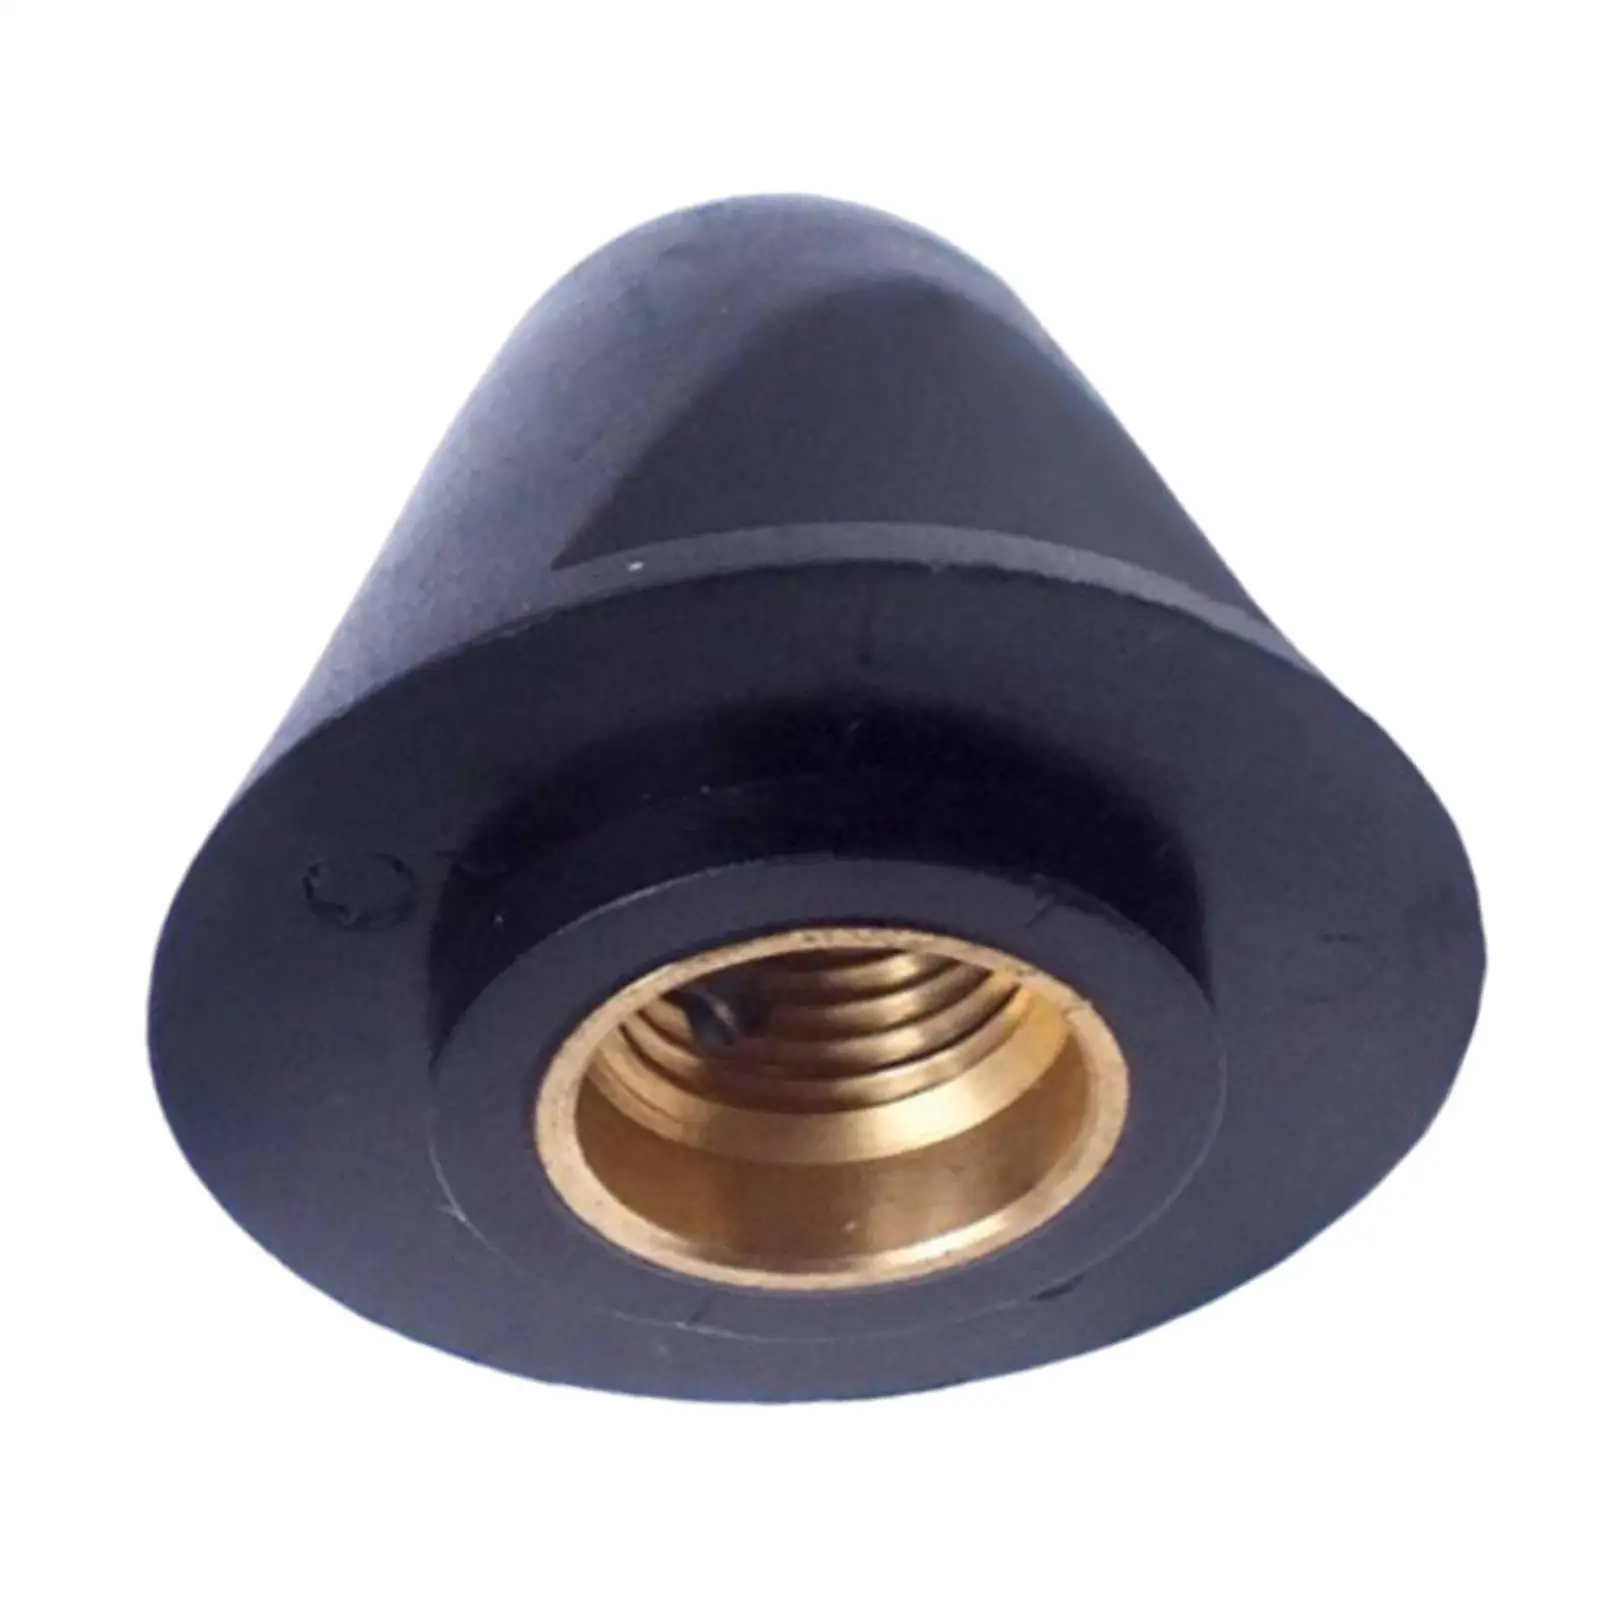 626-45616-01 Easy to Use High Performance Propeller Prop Nut Replaces for Yamaha Outboard Motor Old Version 6HP 8HP 9.9HP